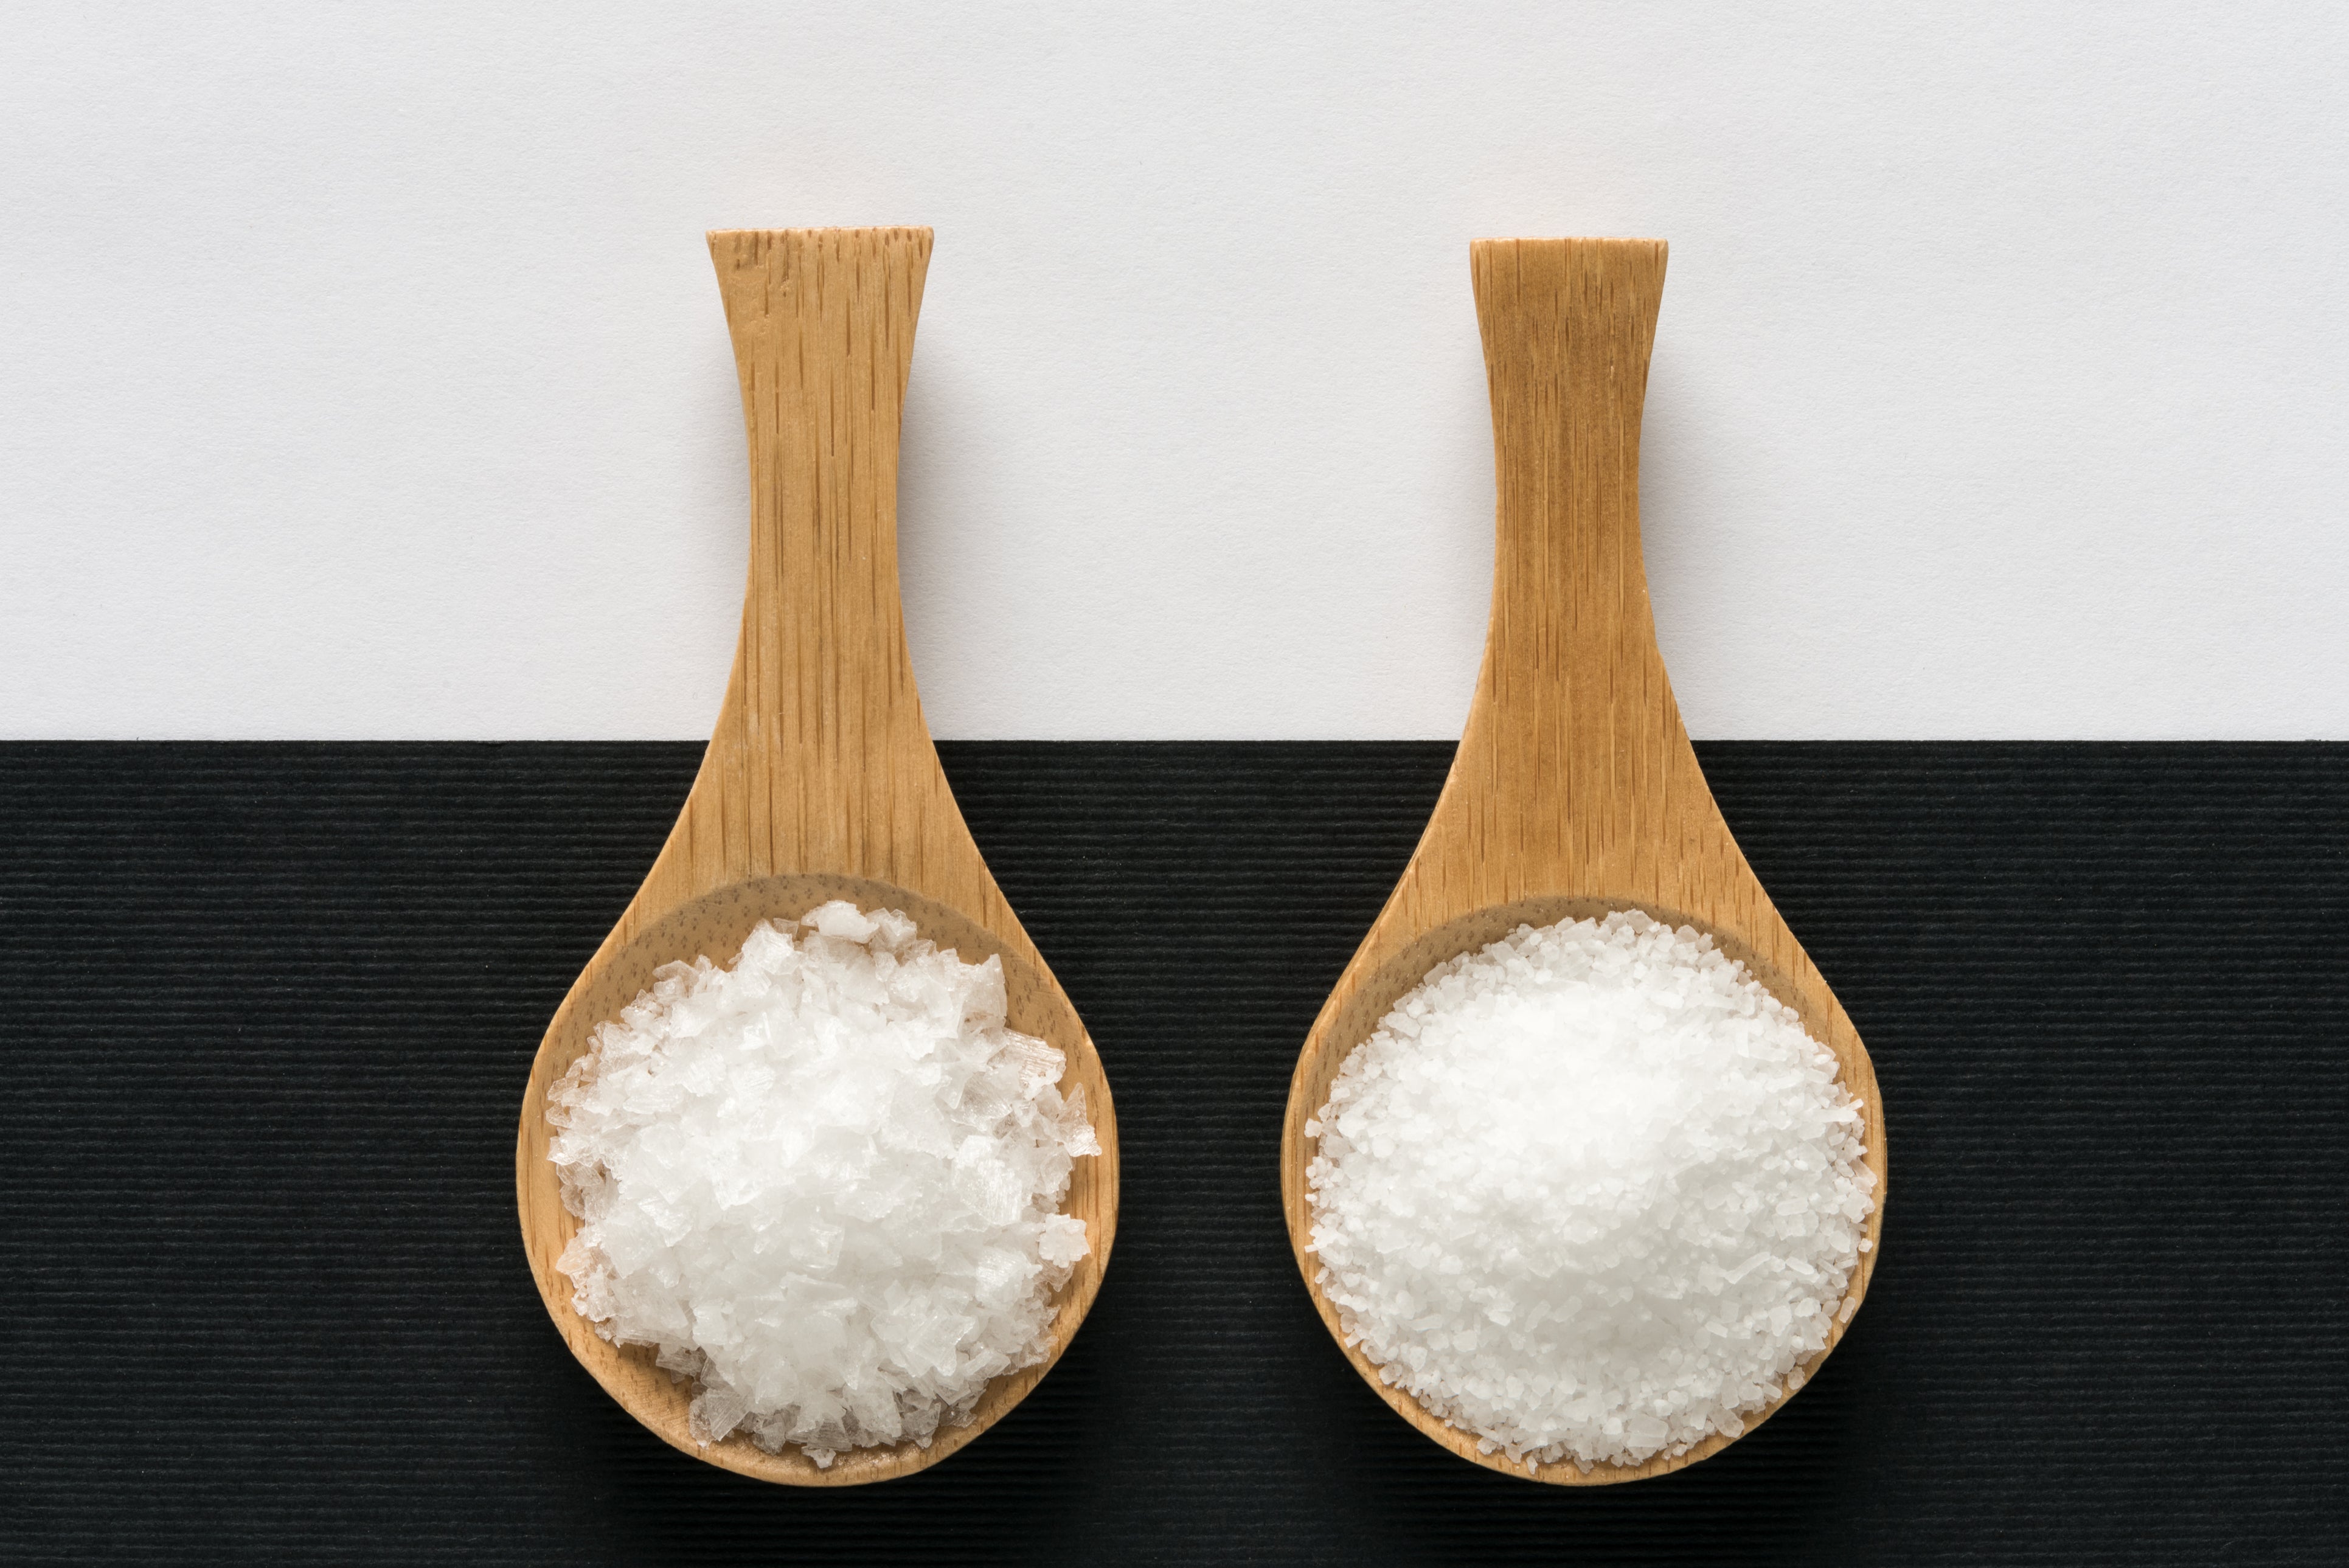 It is relatively easy to reduce one’s preference for high salt by gradually using and consuming less of it